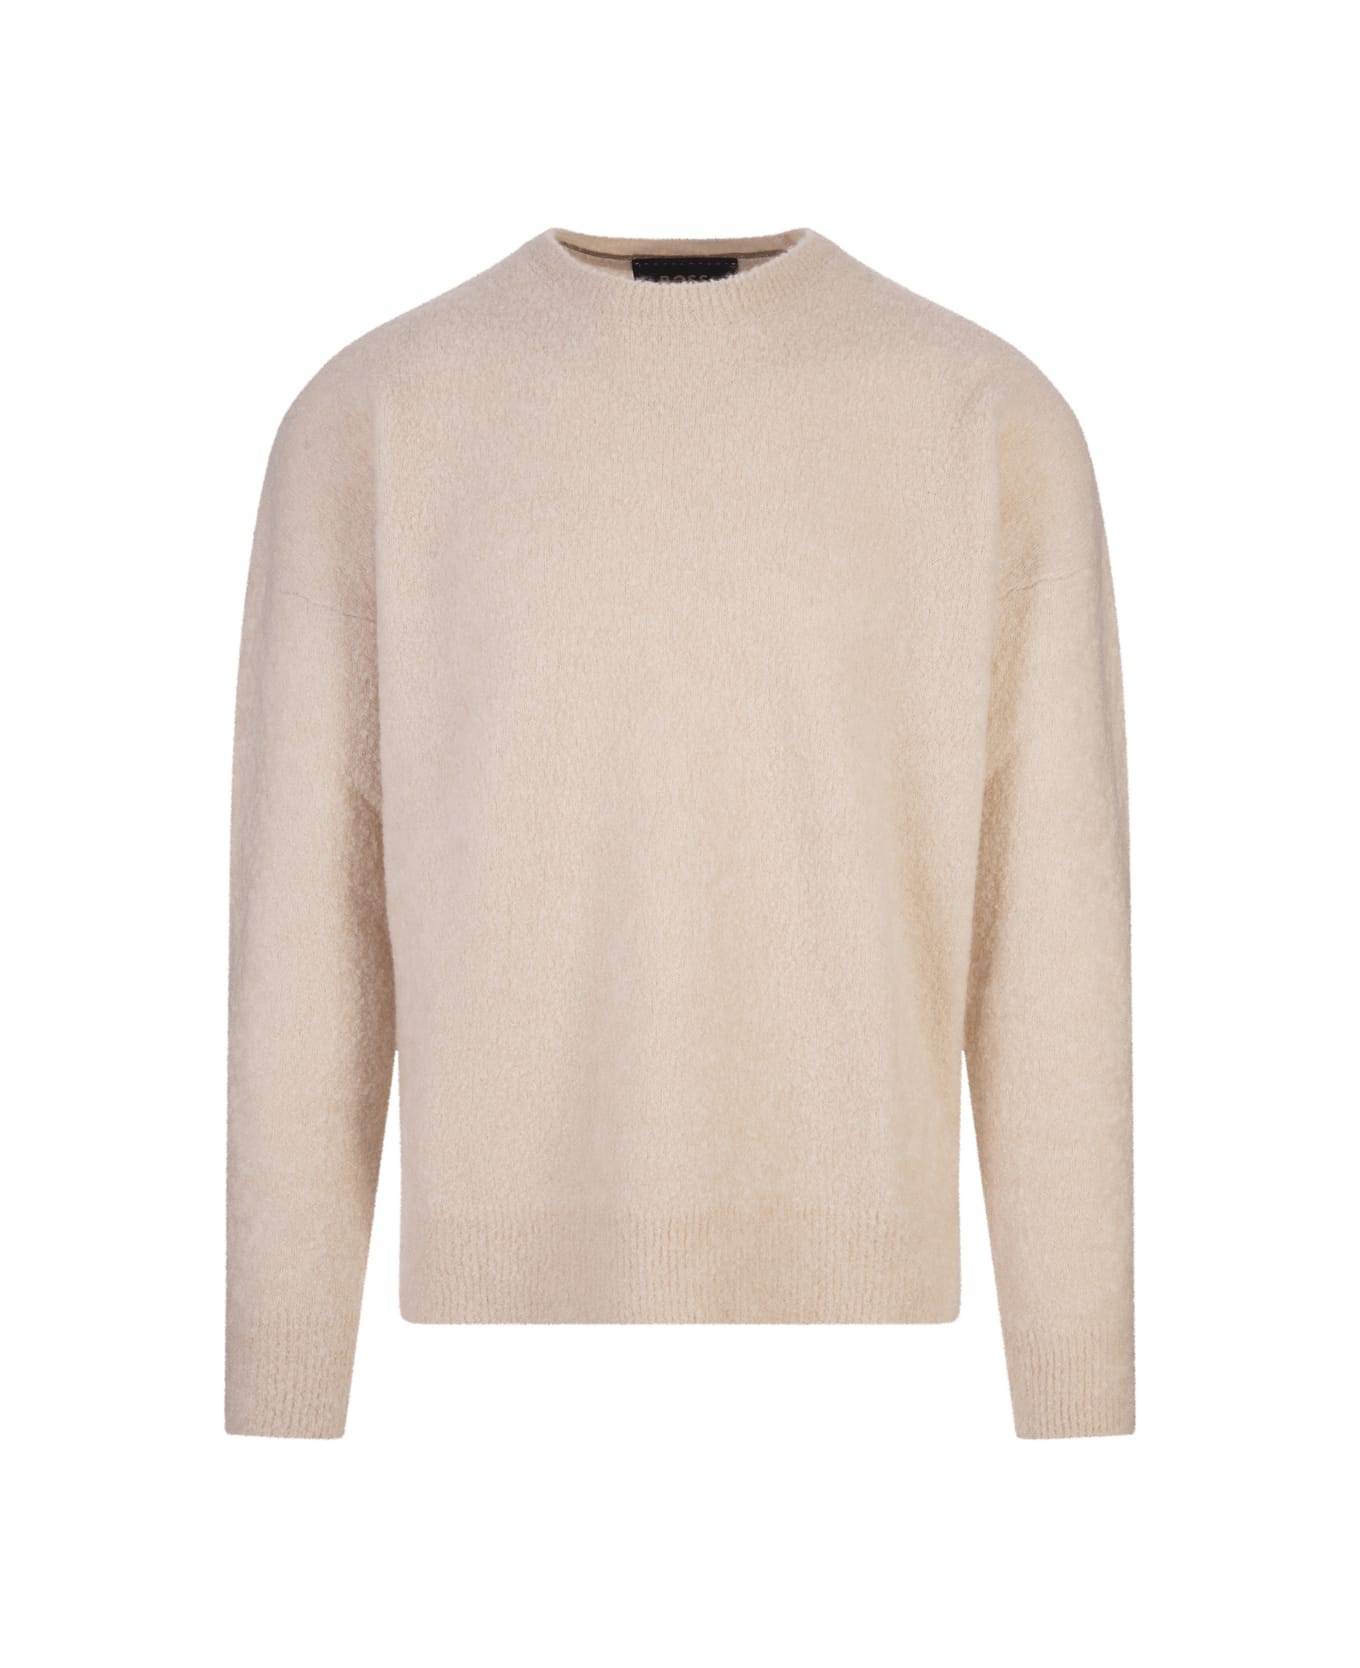 Hugo Boss Relaxed Fit Sweater In Beige Cashmere And Silk - Brown ニットウェア